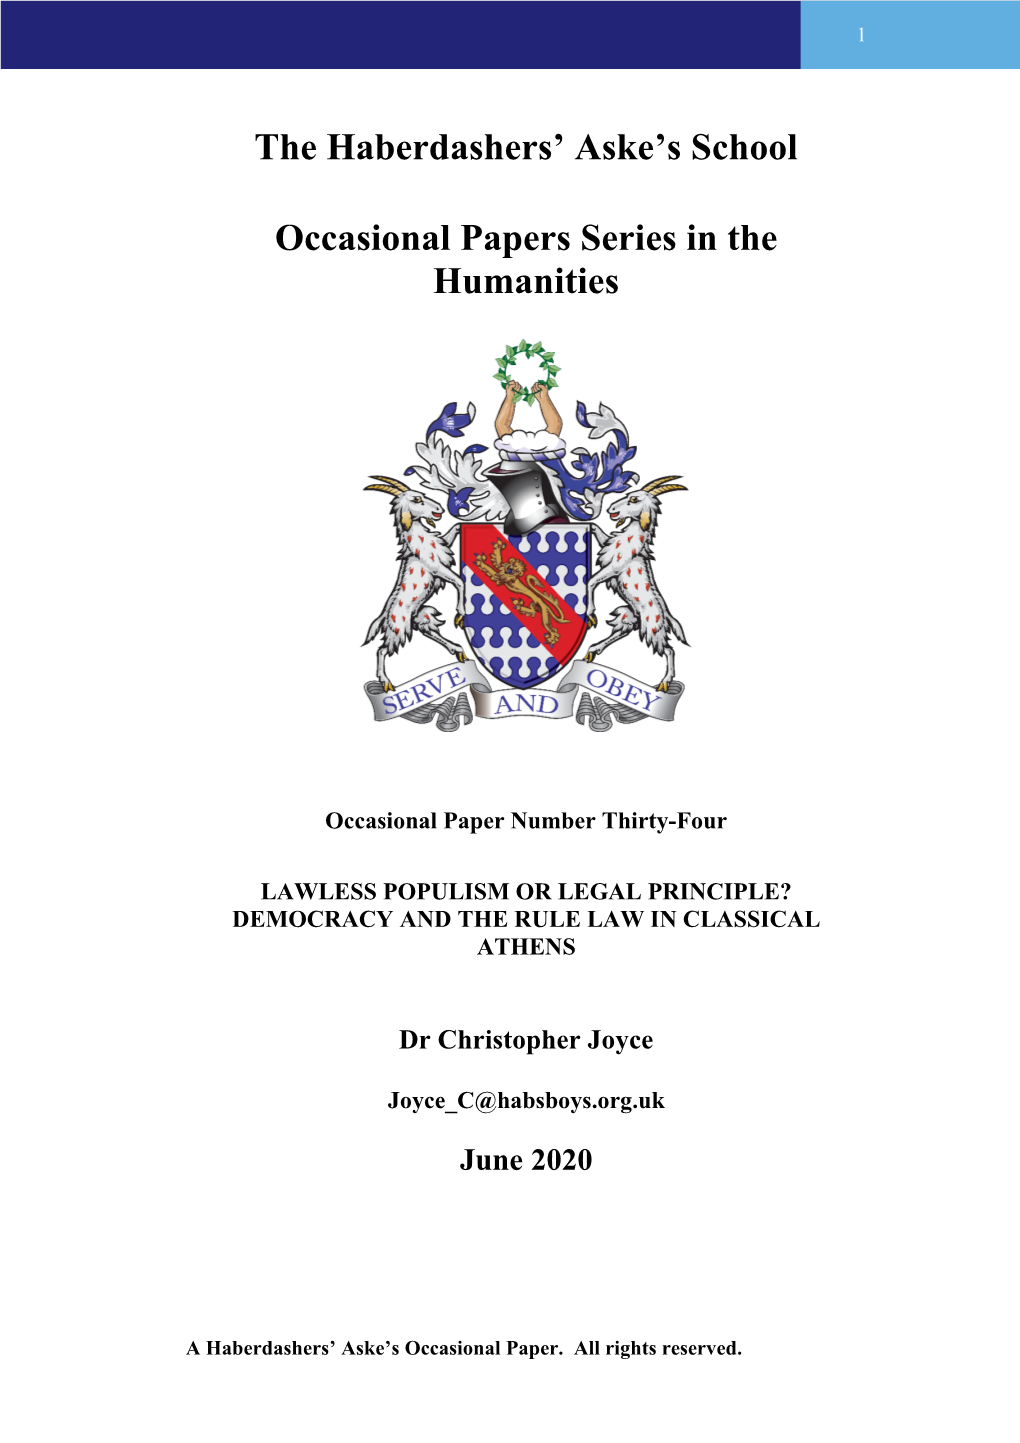 The Haberdashers' Aske's School Occasional Papers Series in The